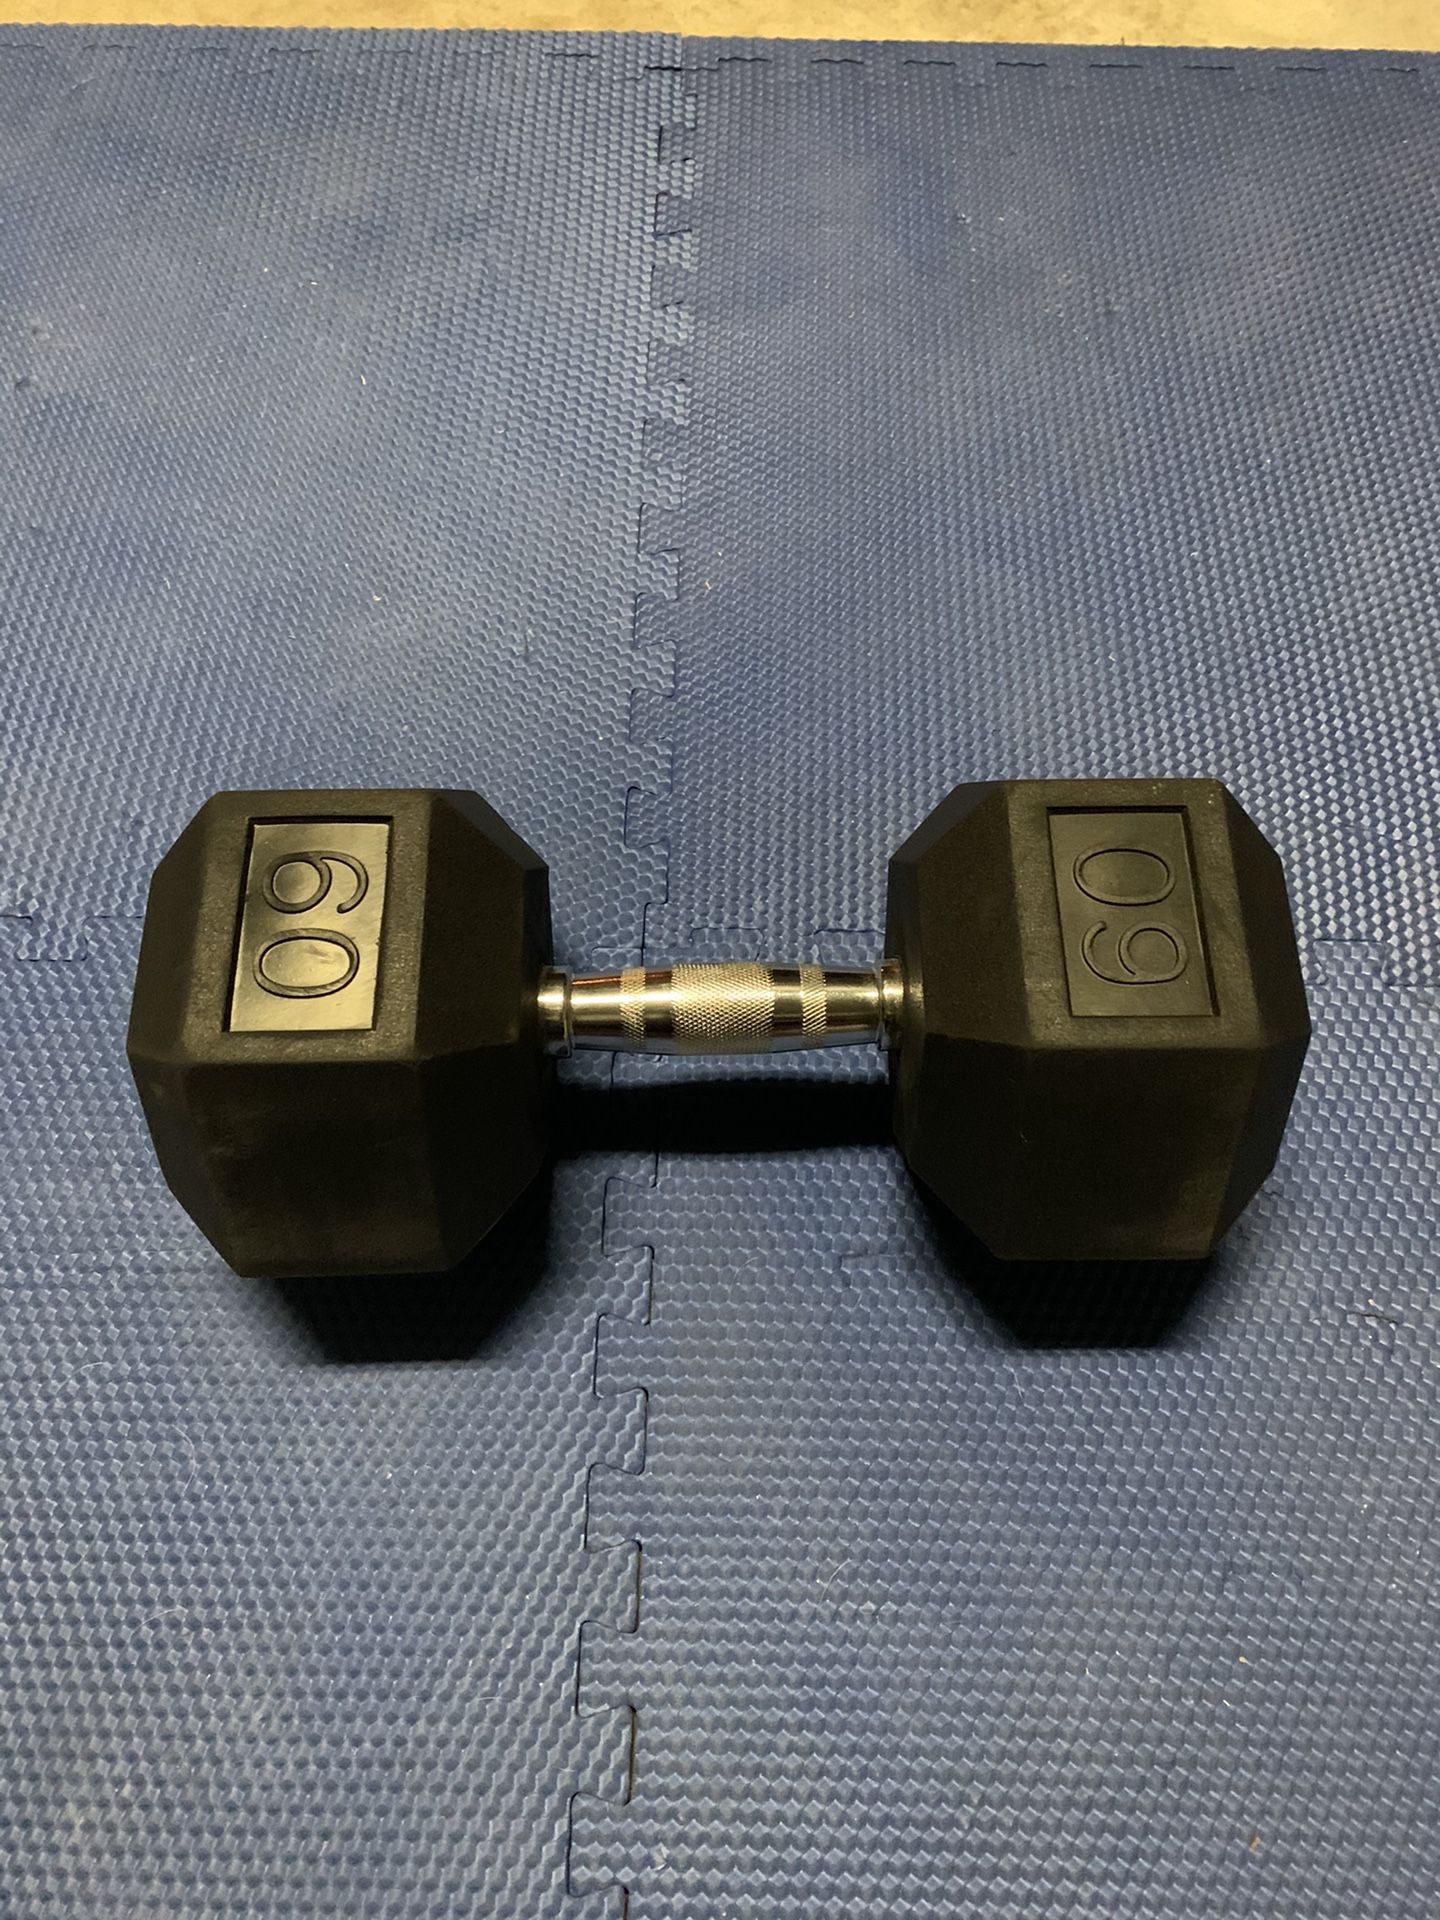 60lb brand new hex rubber coated dumbbell ( retails for $85)